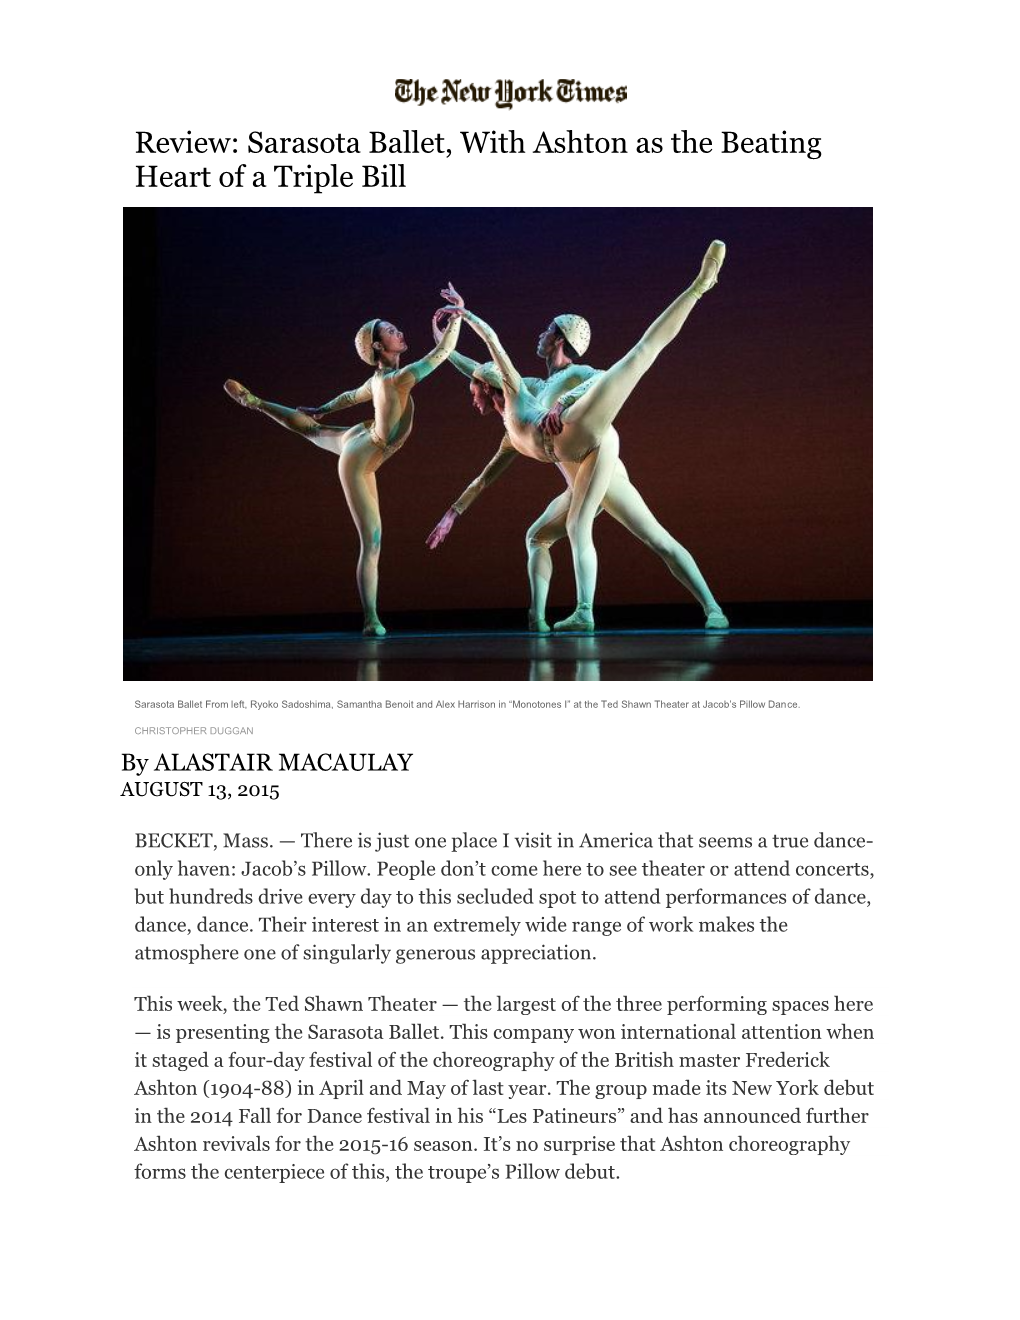 Review: Sarasota Ballet, with Ashton As the Beating Heart of a Triple Bill